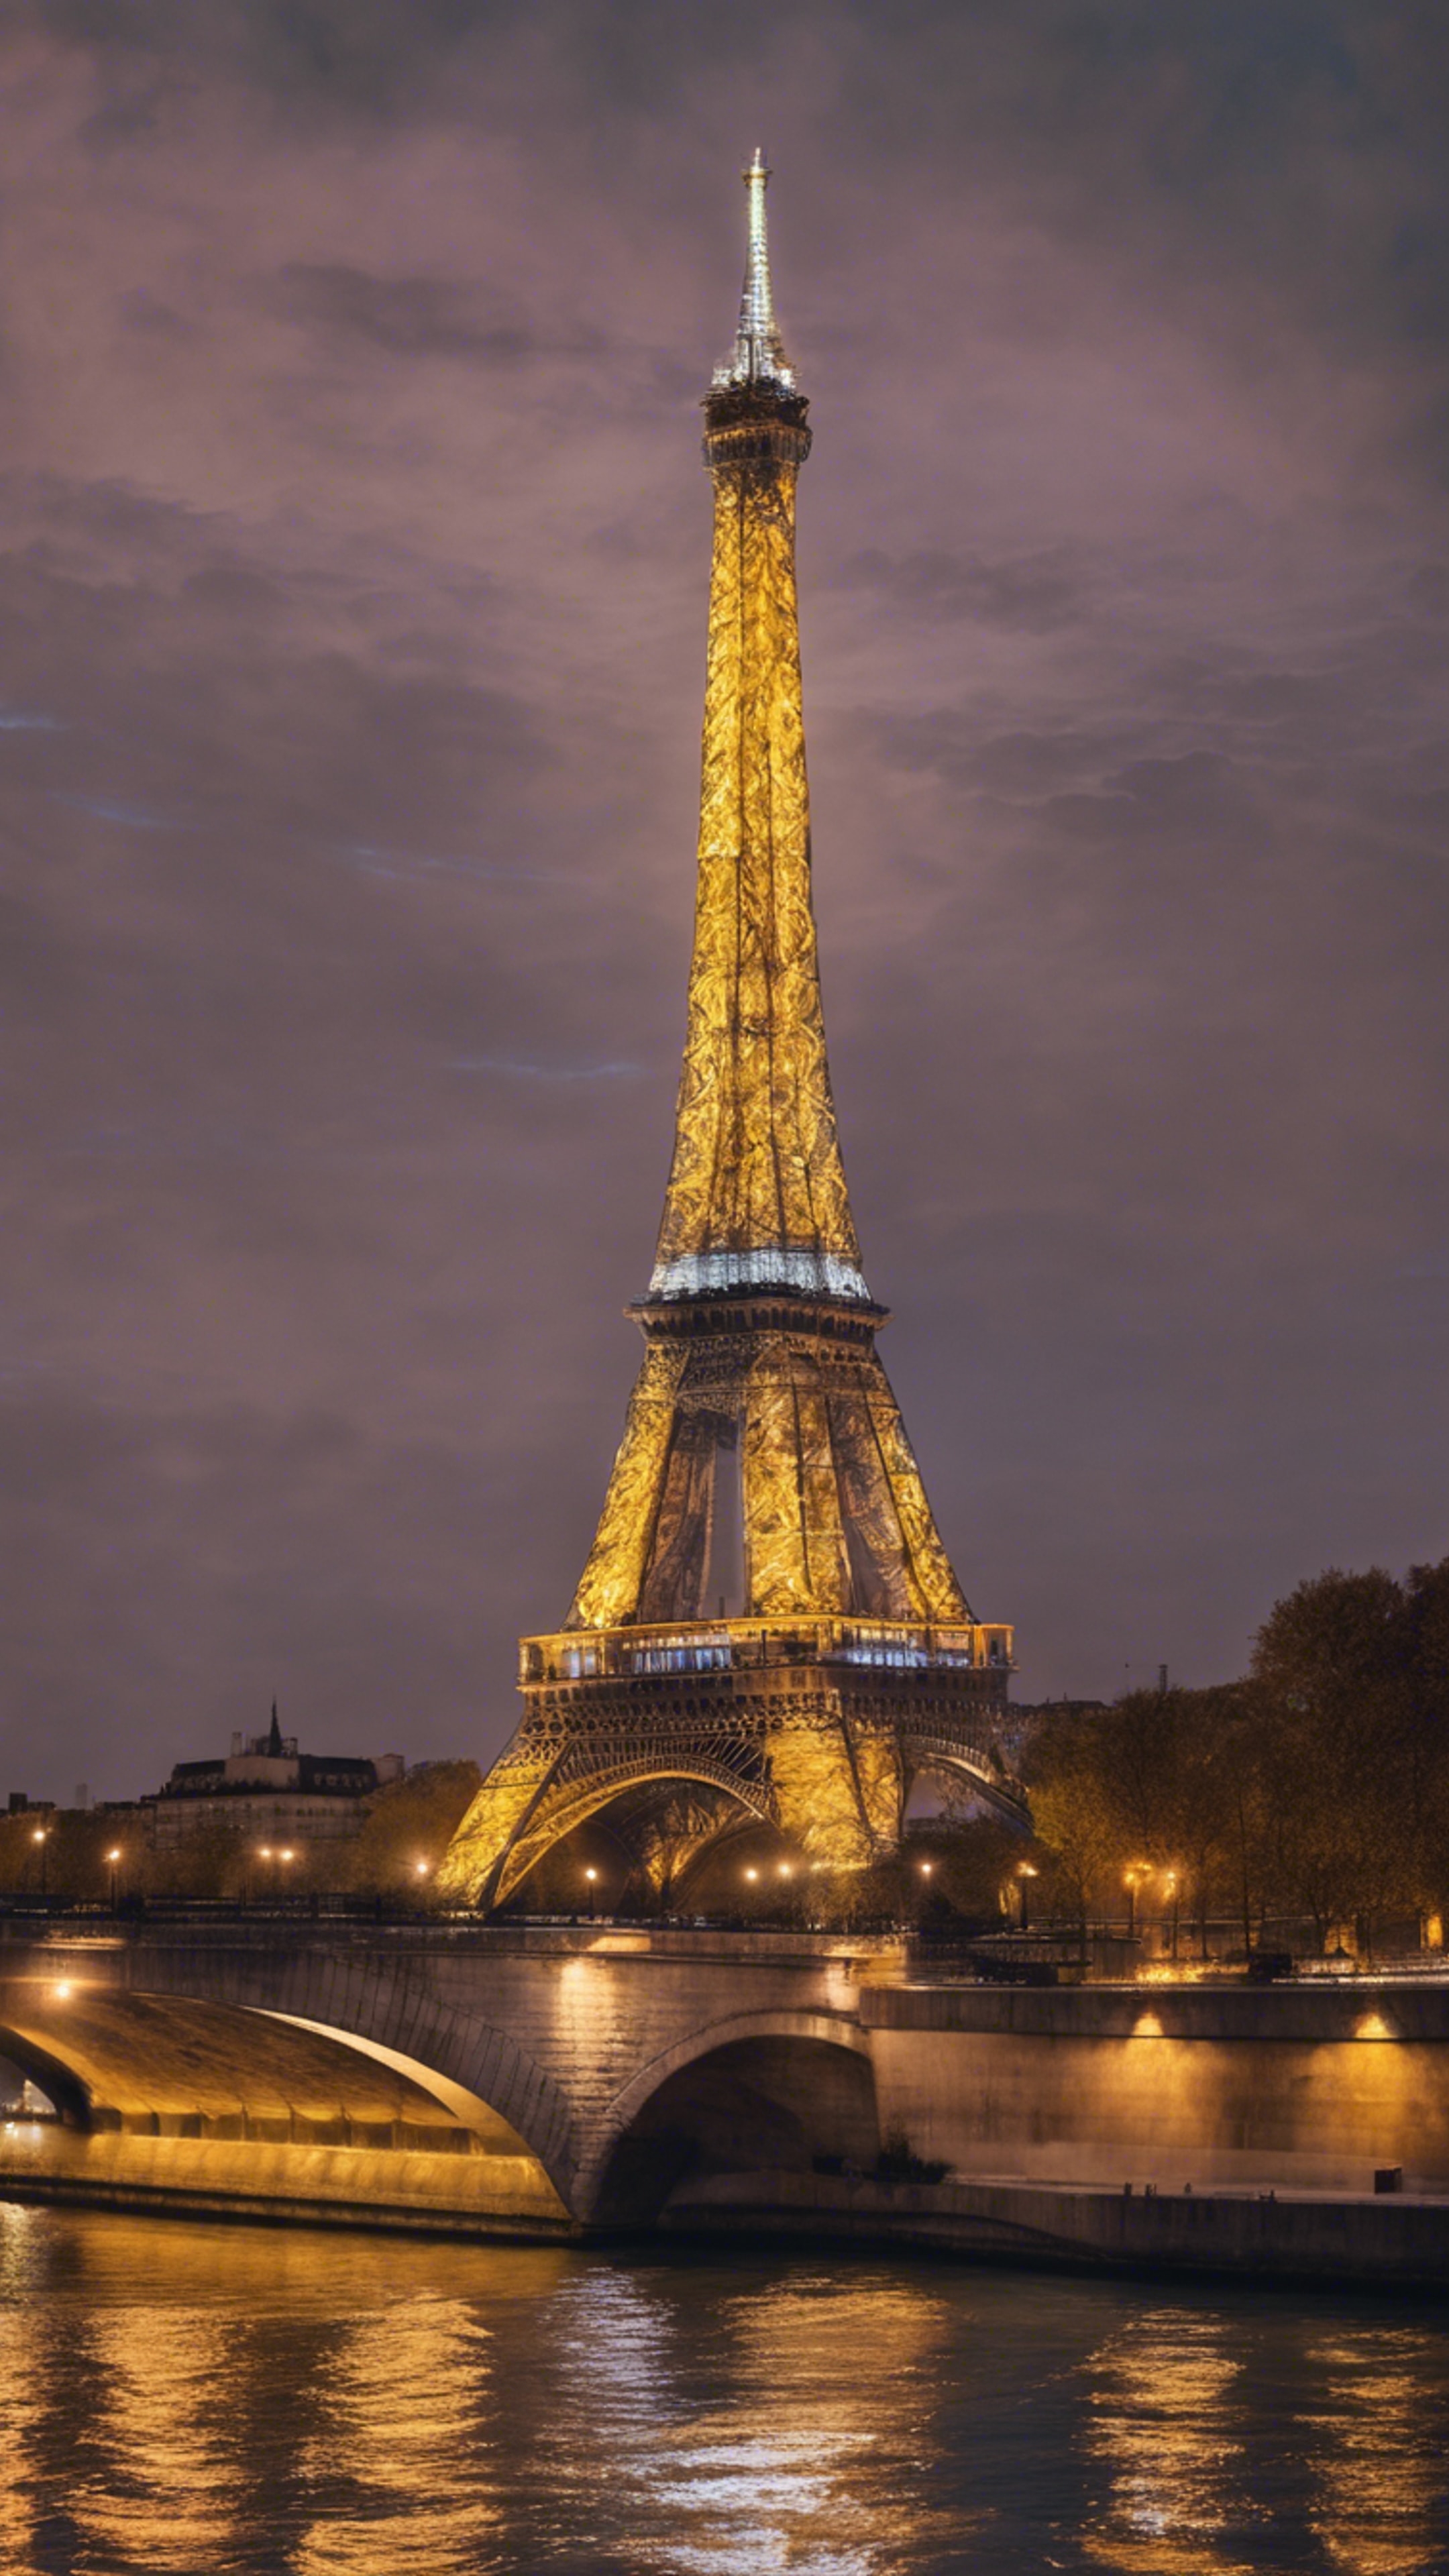 Eiffel tower illuminated against the Paris skyline at night, reflecting in the smooth waters of the river Seine. Шпалери[bfd7e83086d14adeb14c]